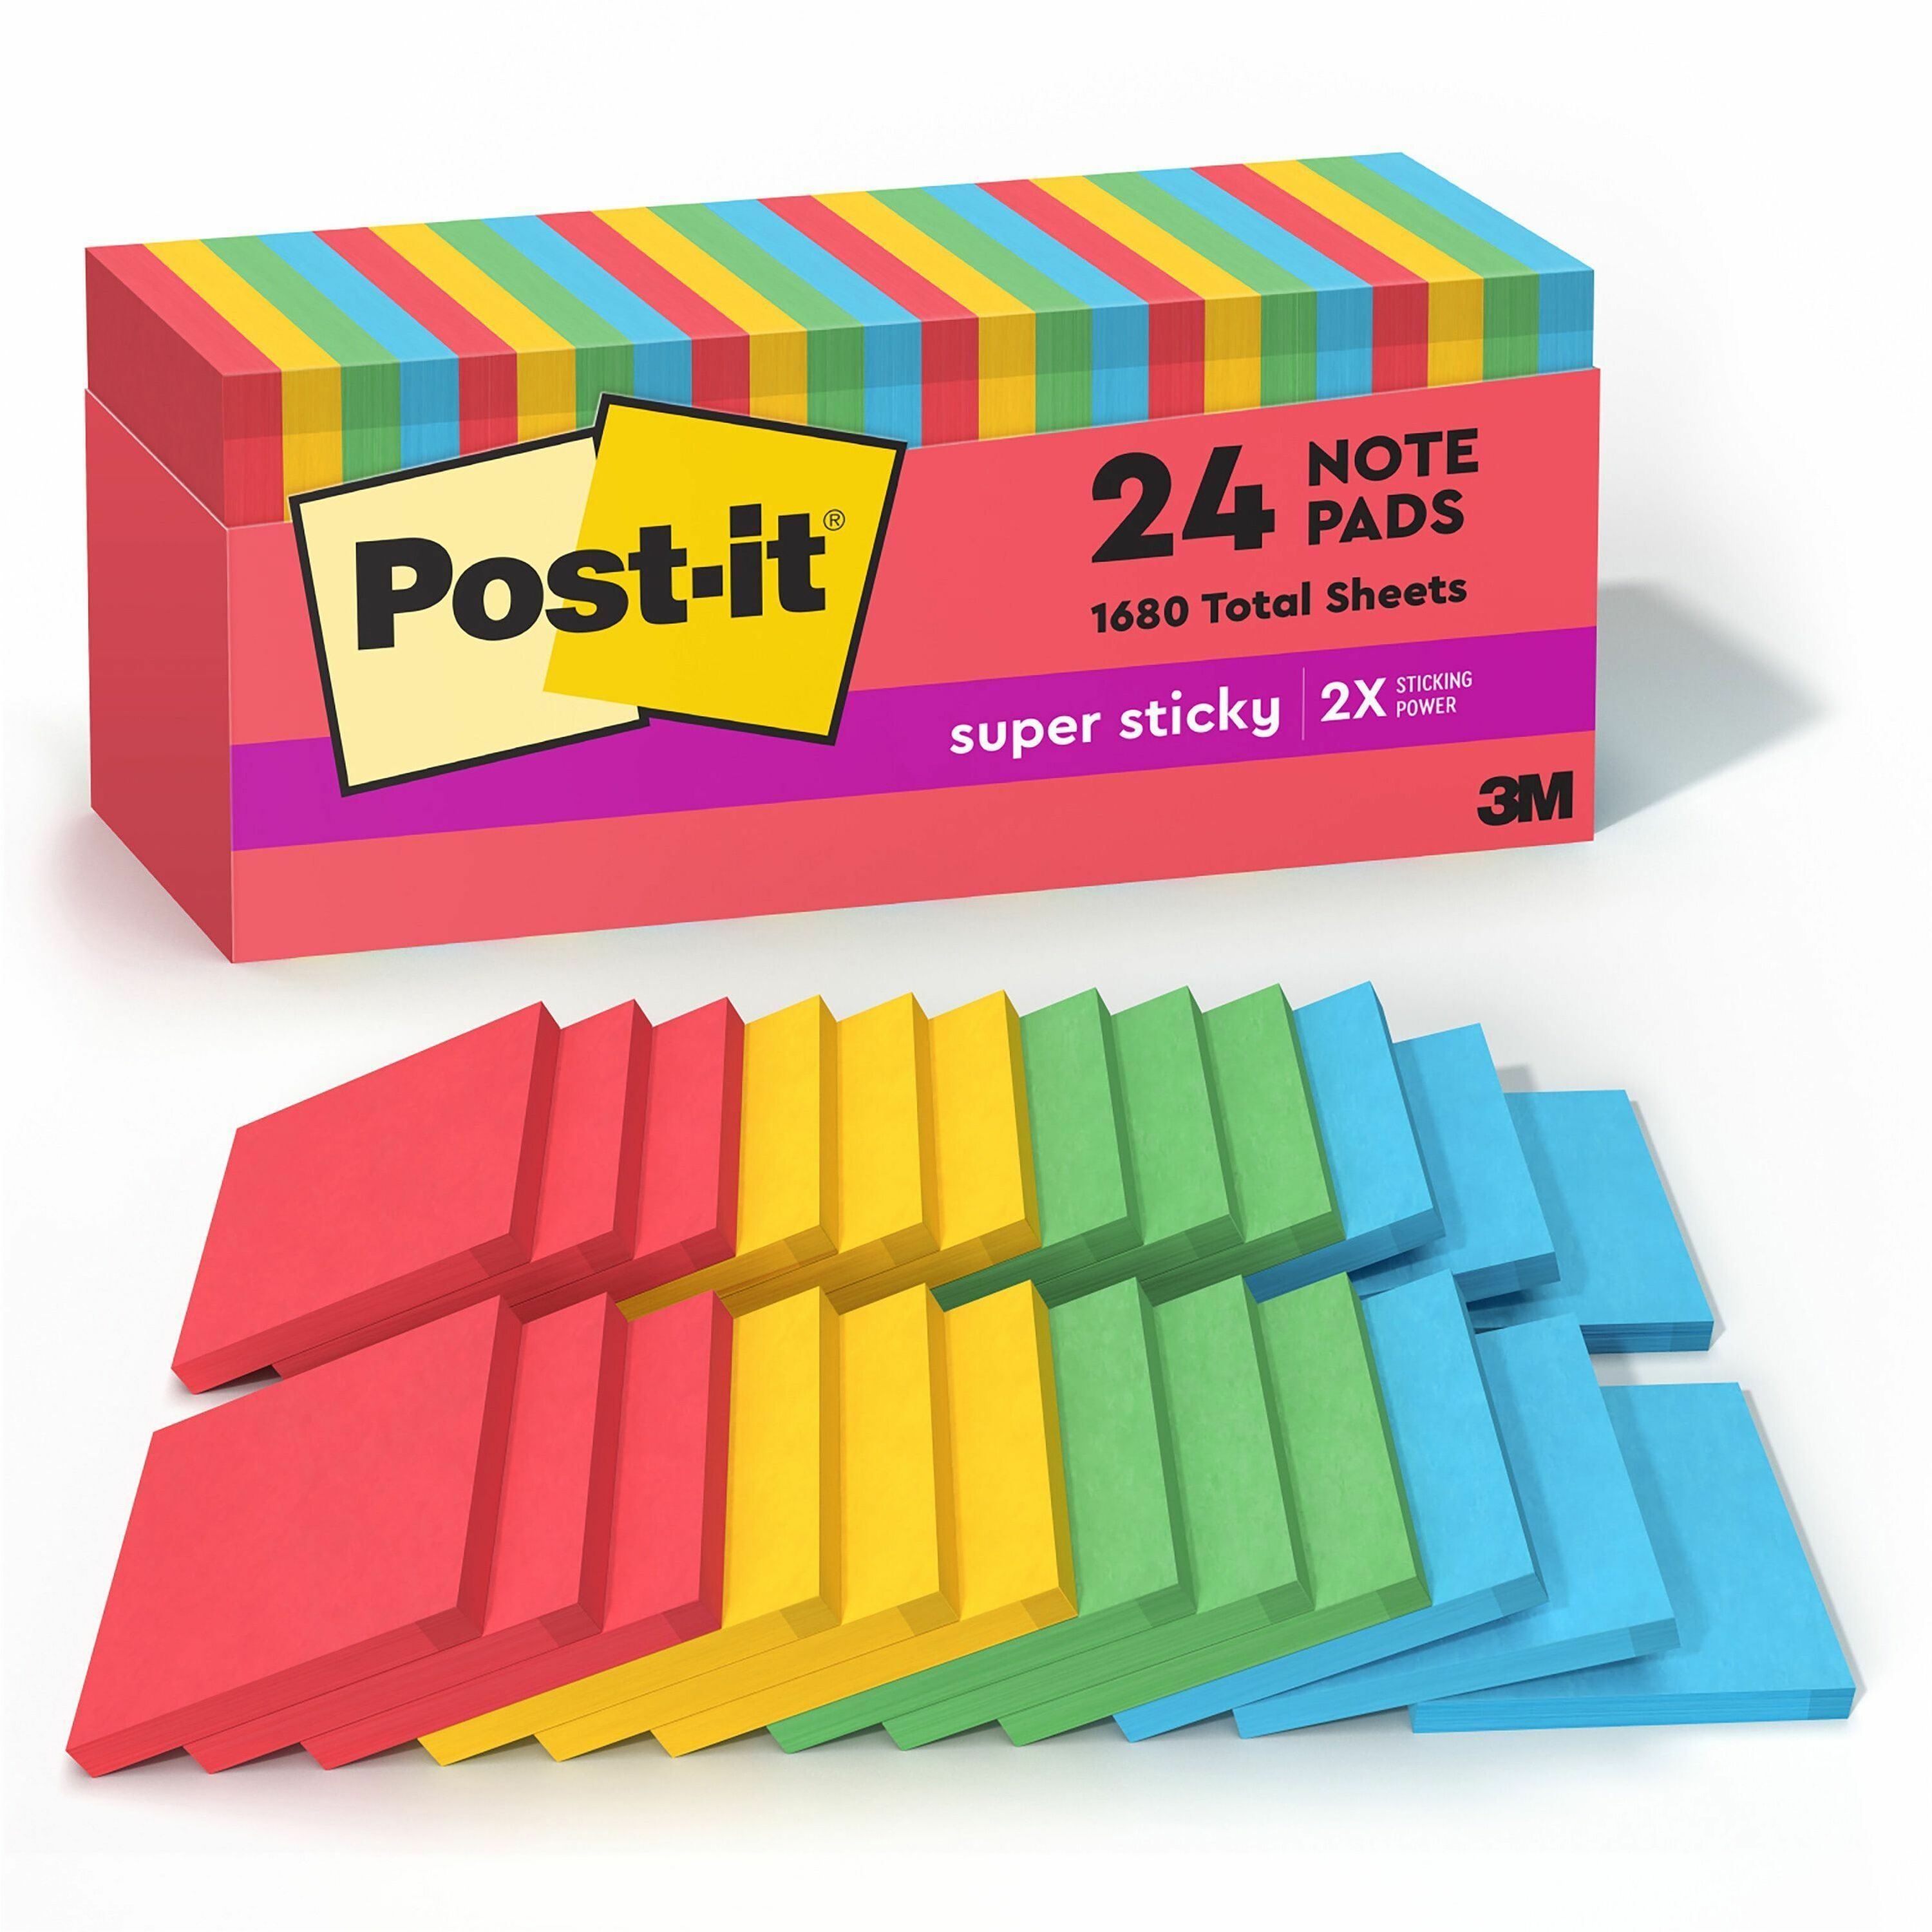 Post-it Super Sticky Notes 2x Sticking Power 3 X 3 Miami Collection 6  Pads for sale online